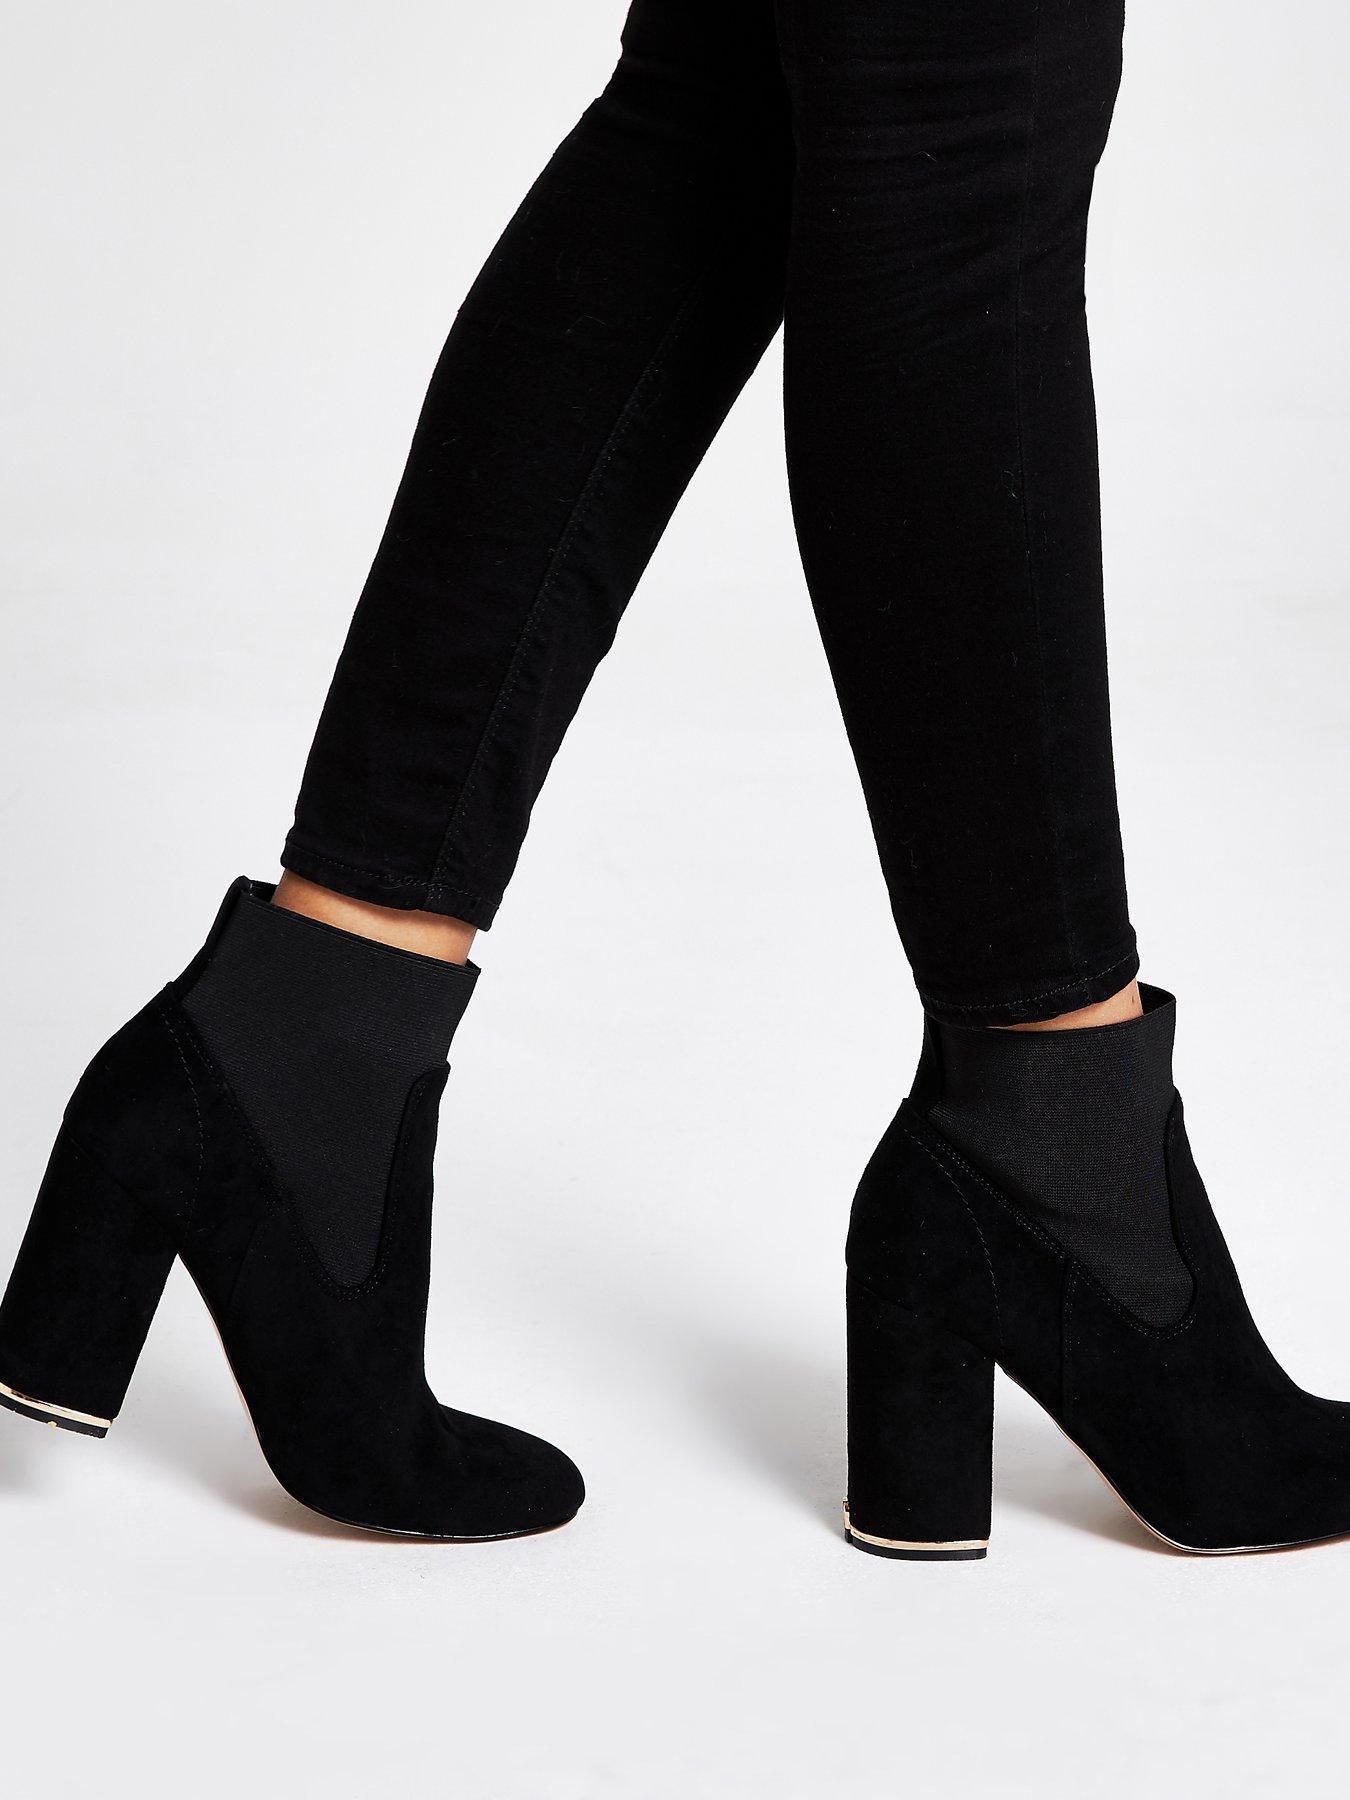 river island suede ankle boots